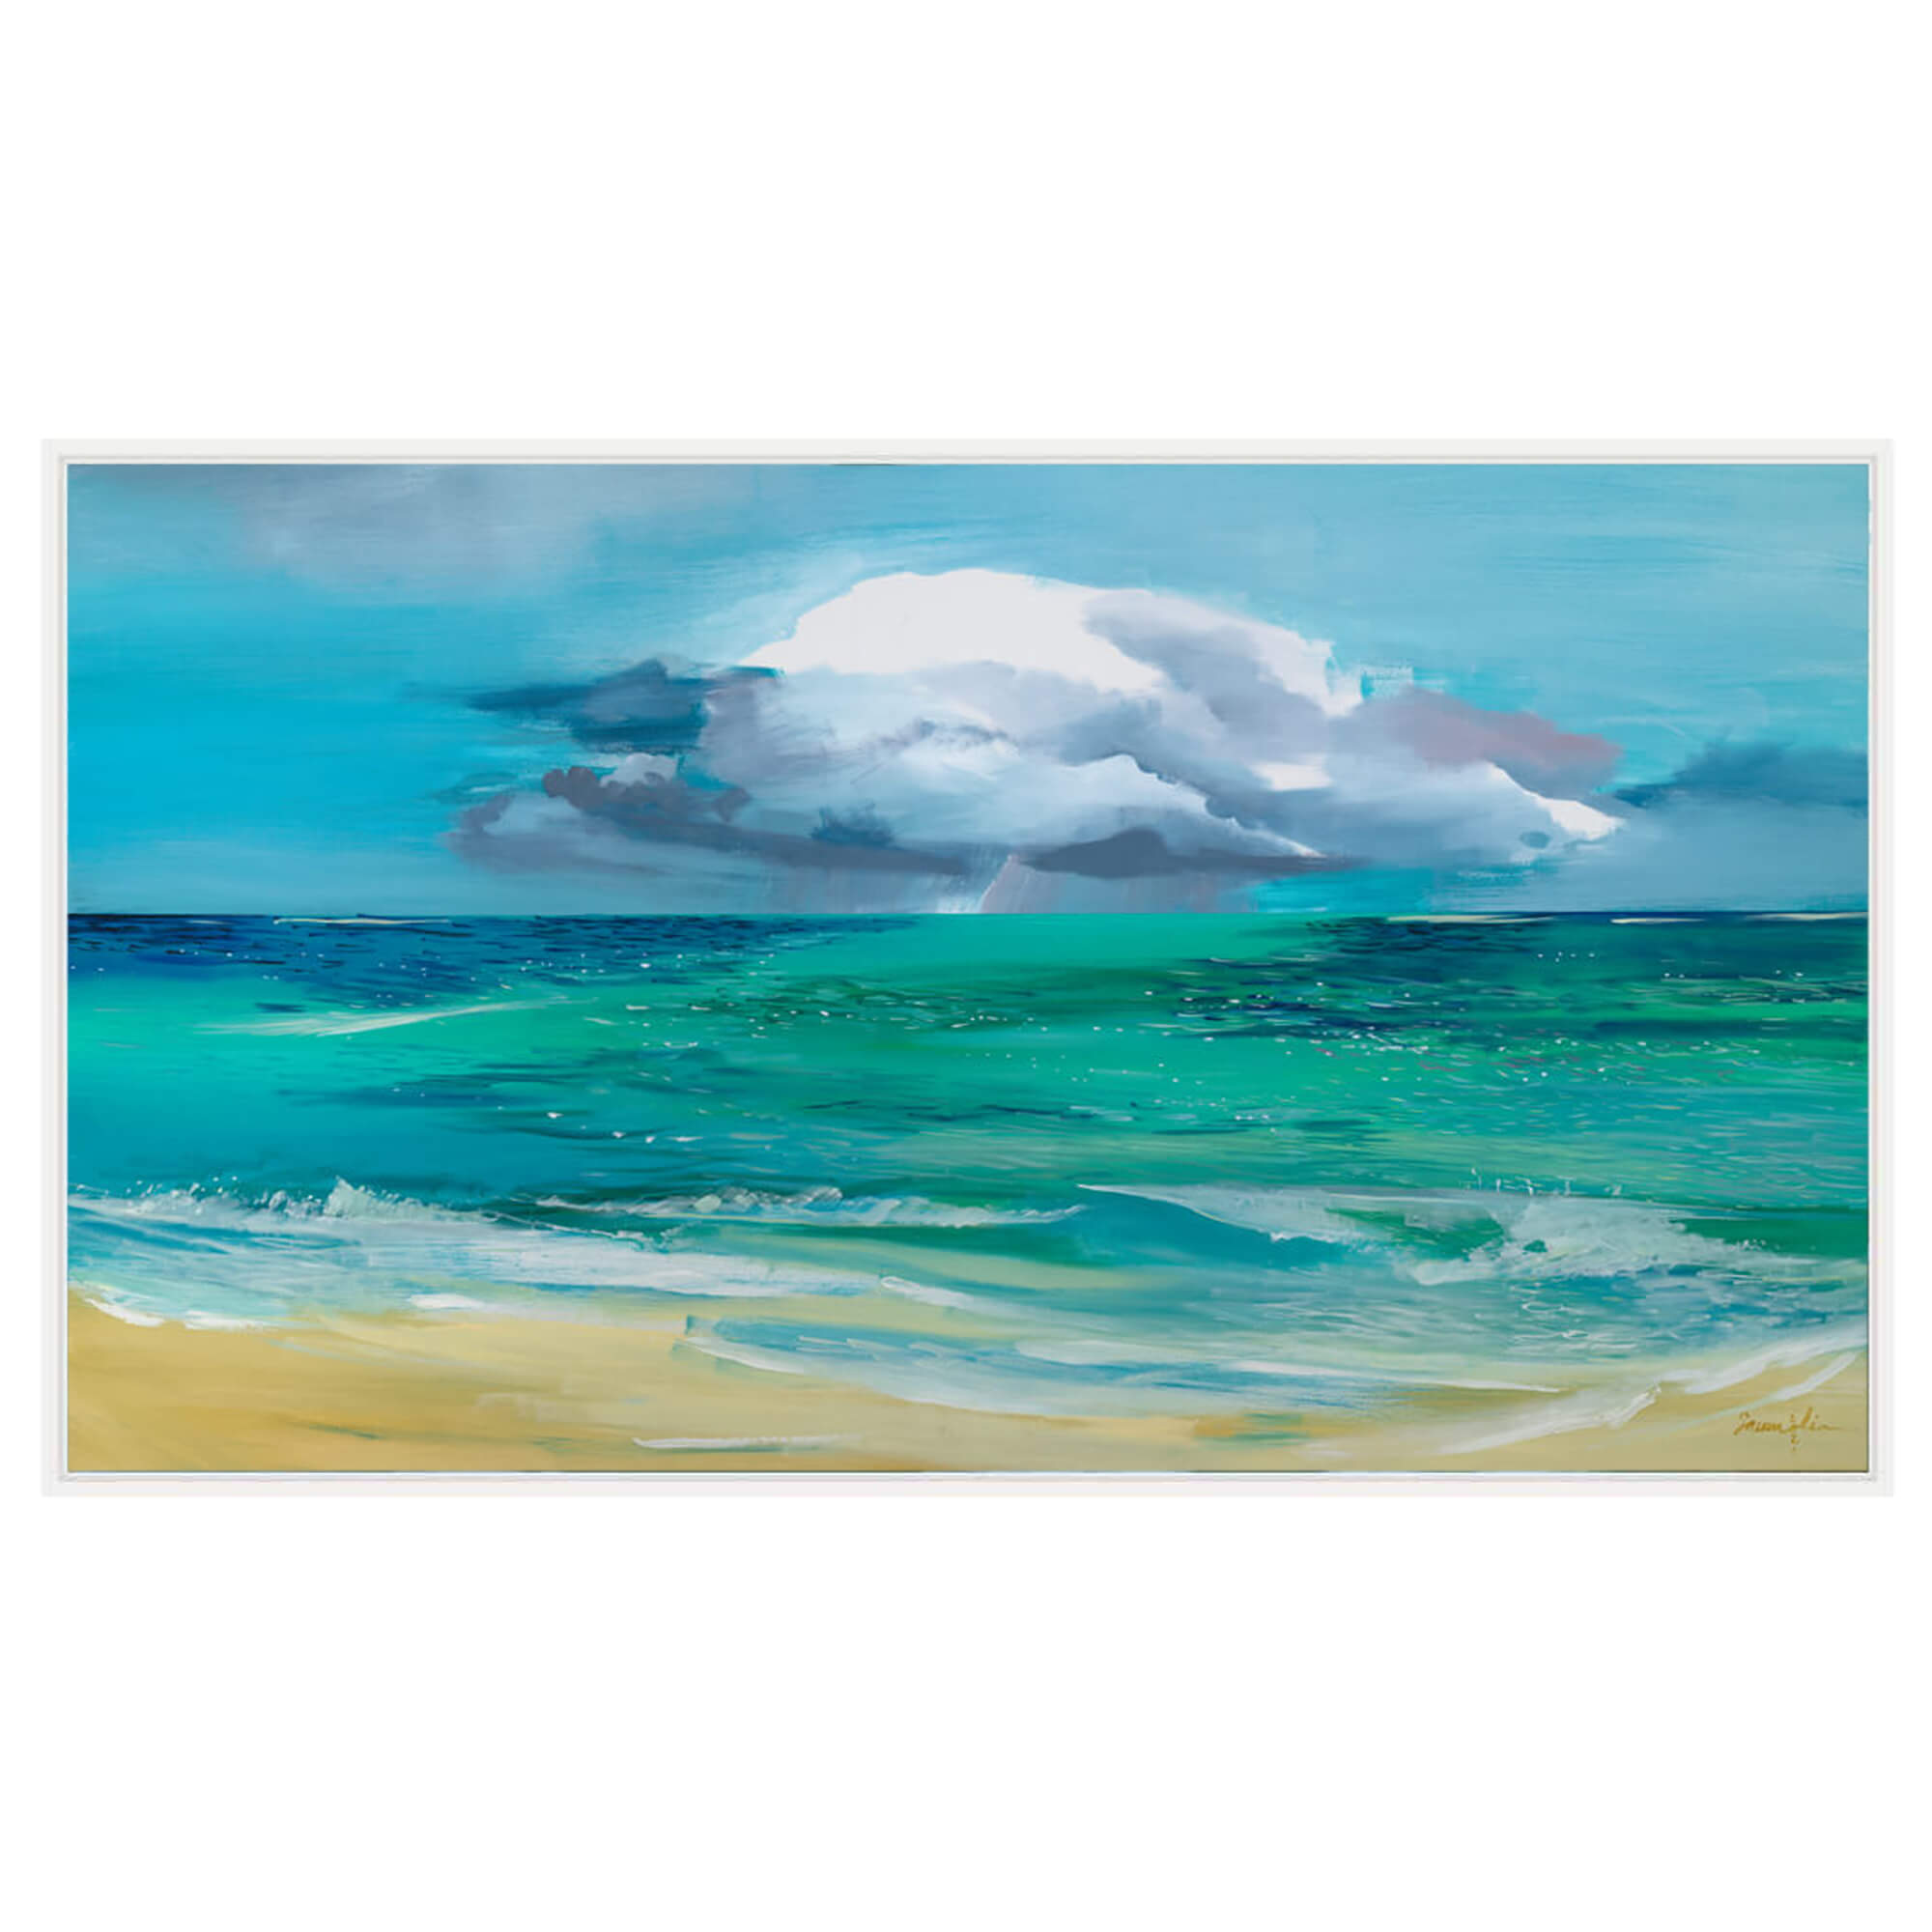 Framed canvas art print depicting calm tranquil waters leading to a beach oasis by Hawaii artist Saumolia Puapuaga 